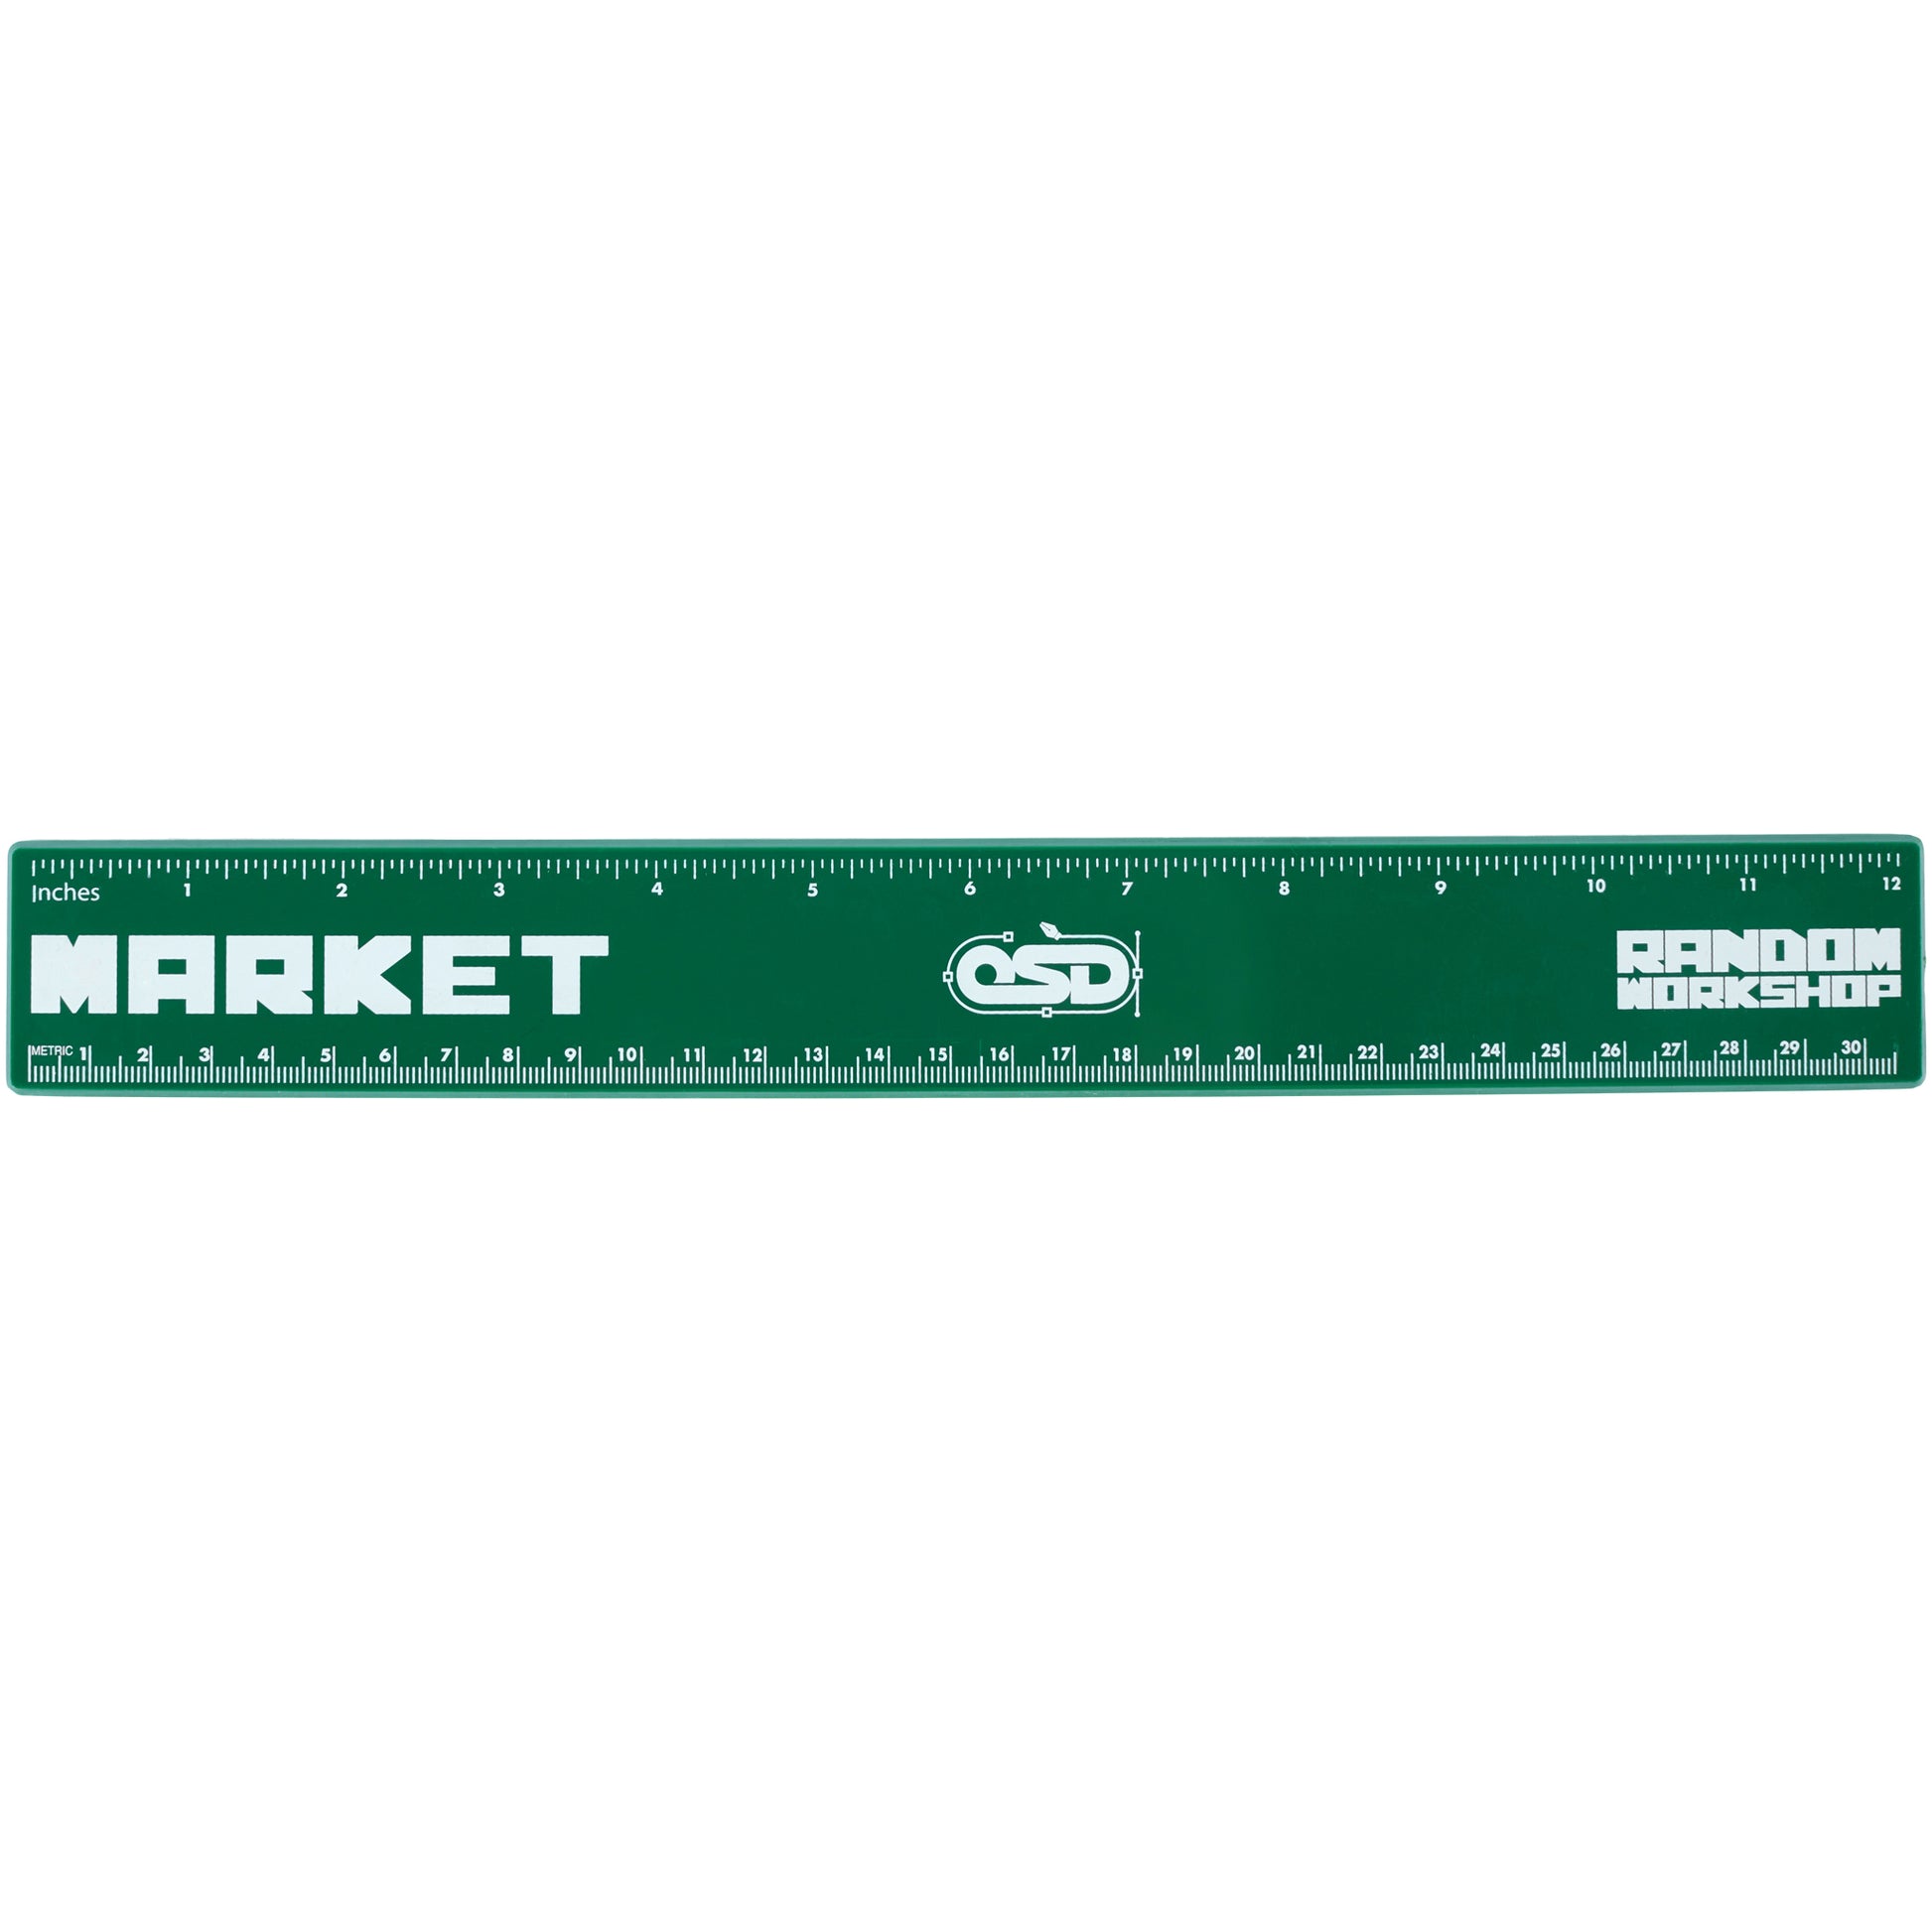 MARKET clothing brand OPEN SOURCE DESIGN RULER. Find more homegoods and graphic tees at MarketStudios.com. Formally Chinatown Market. 